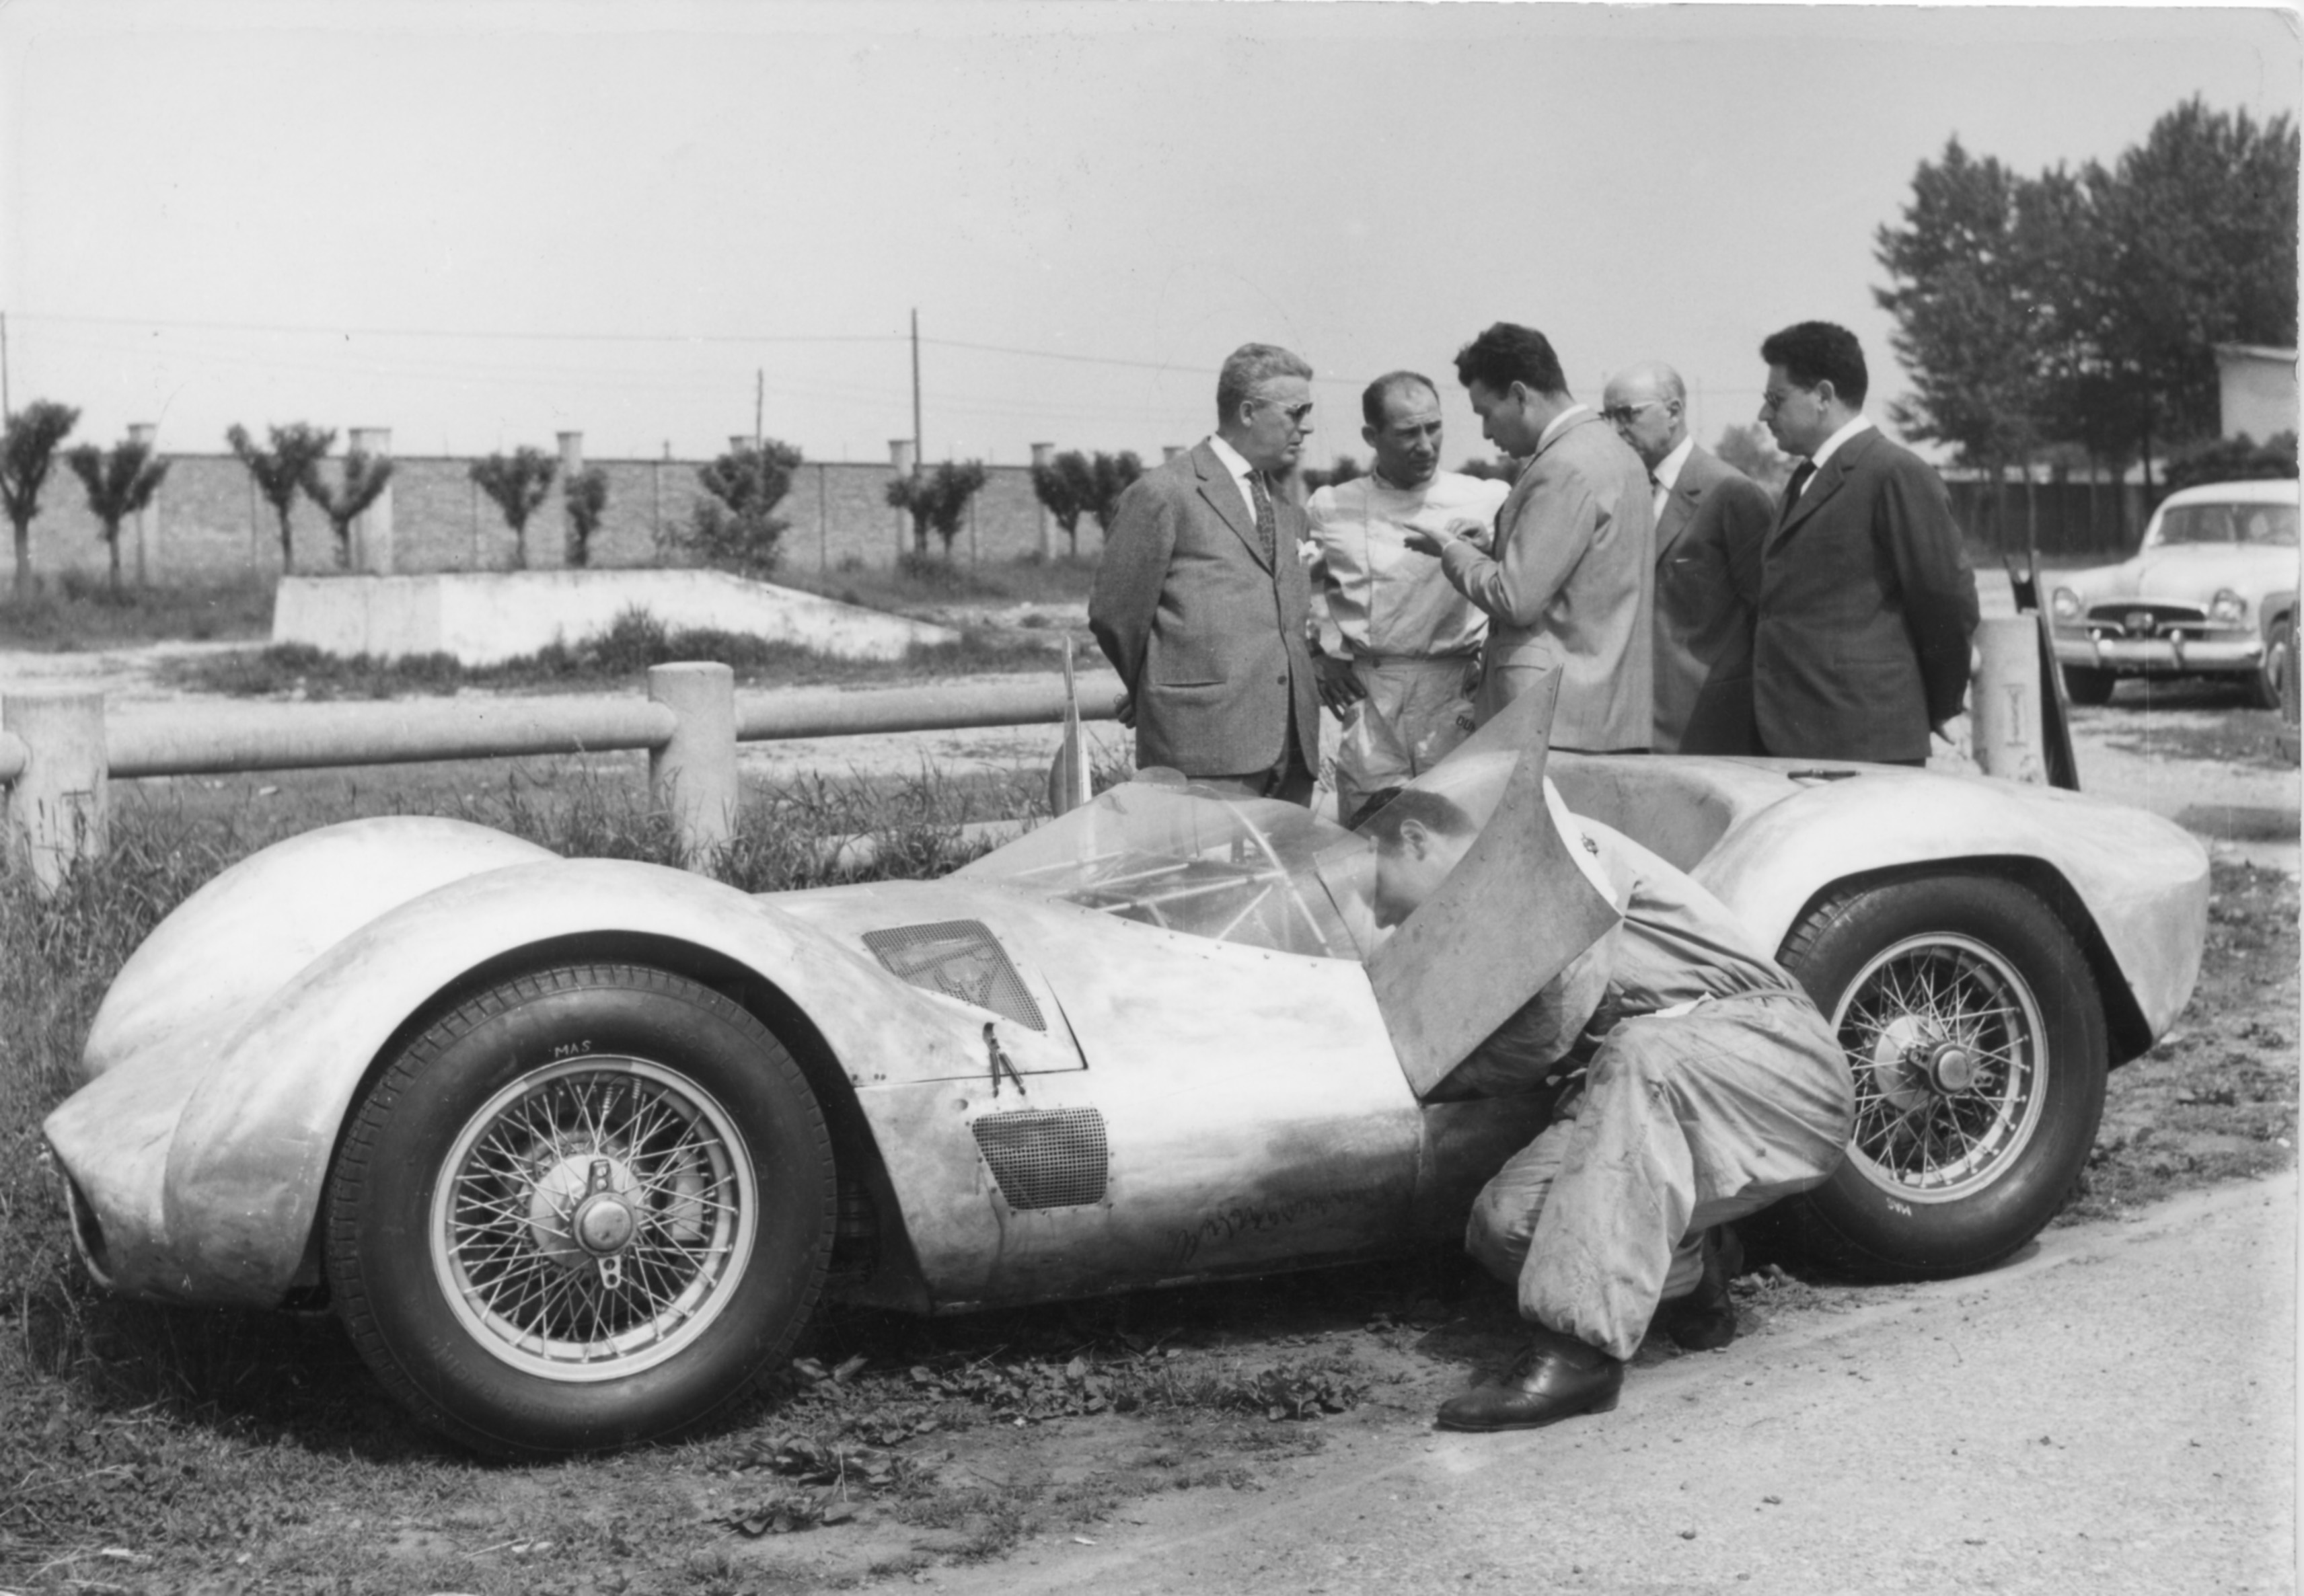 Moss testing the Type 60 at Modena